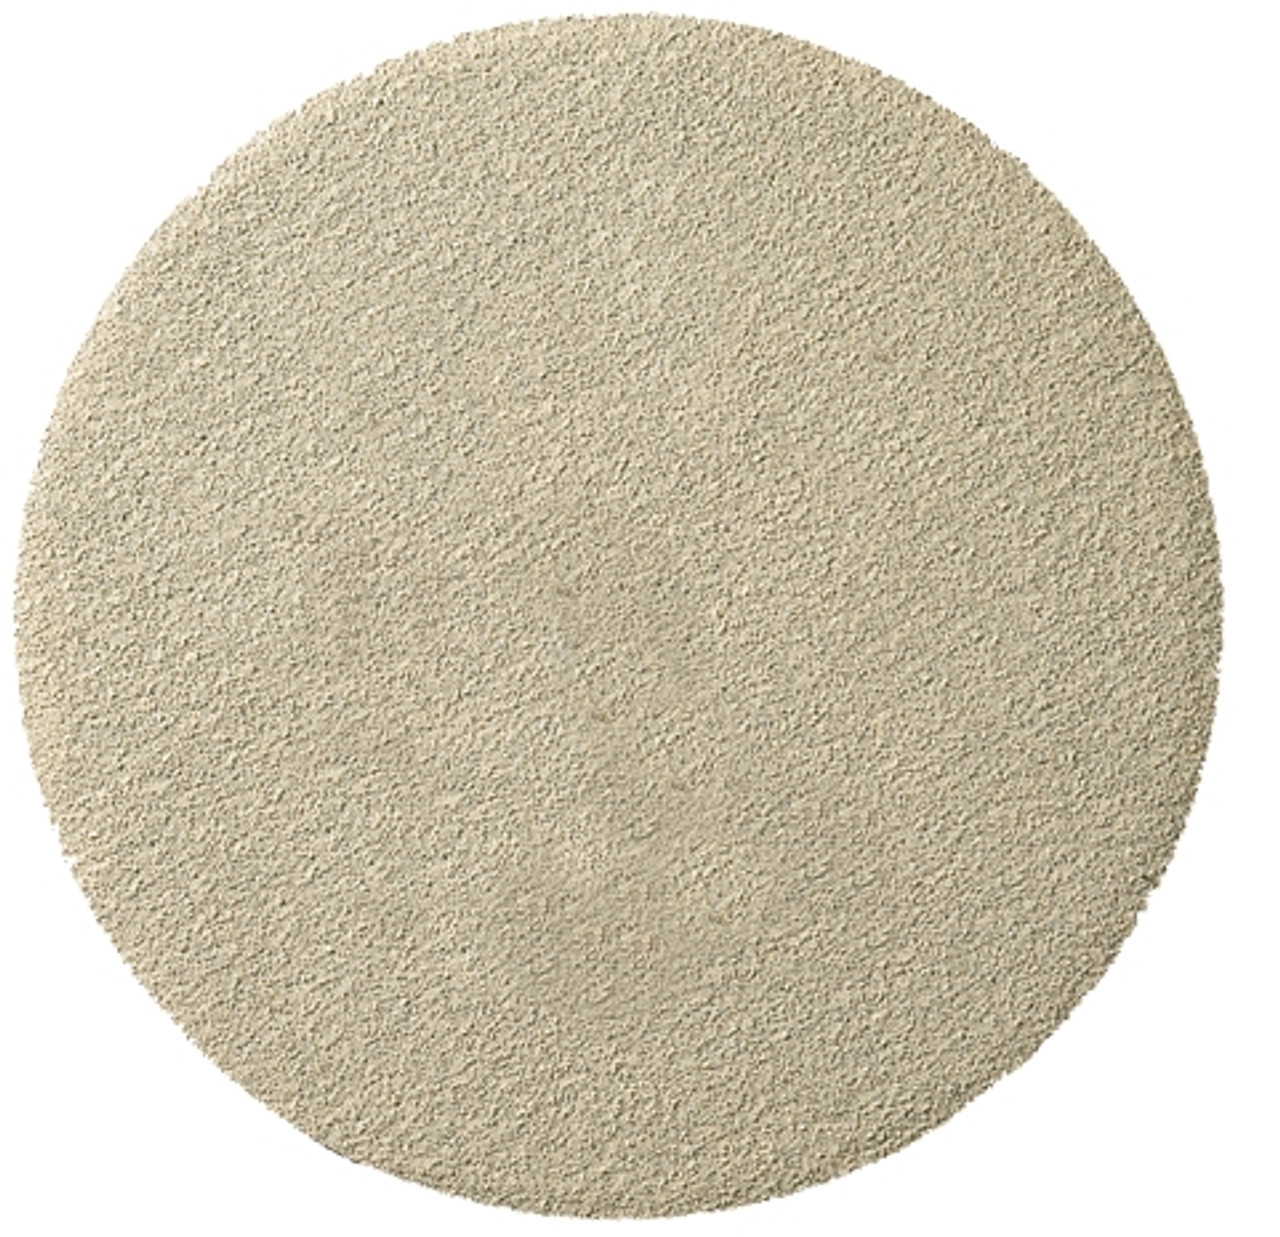 Self Fastening Disc - (Ps33) Paper/Aluminium Oxide/No Hole 40Grit 200Mm